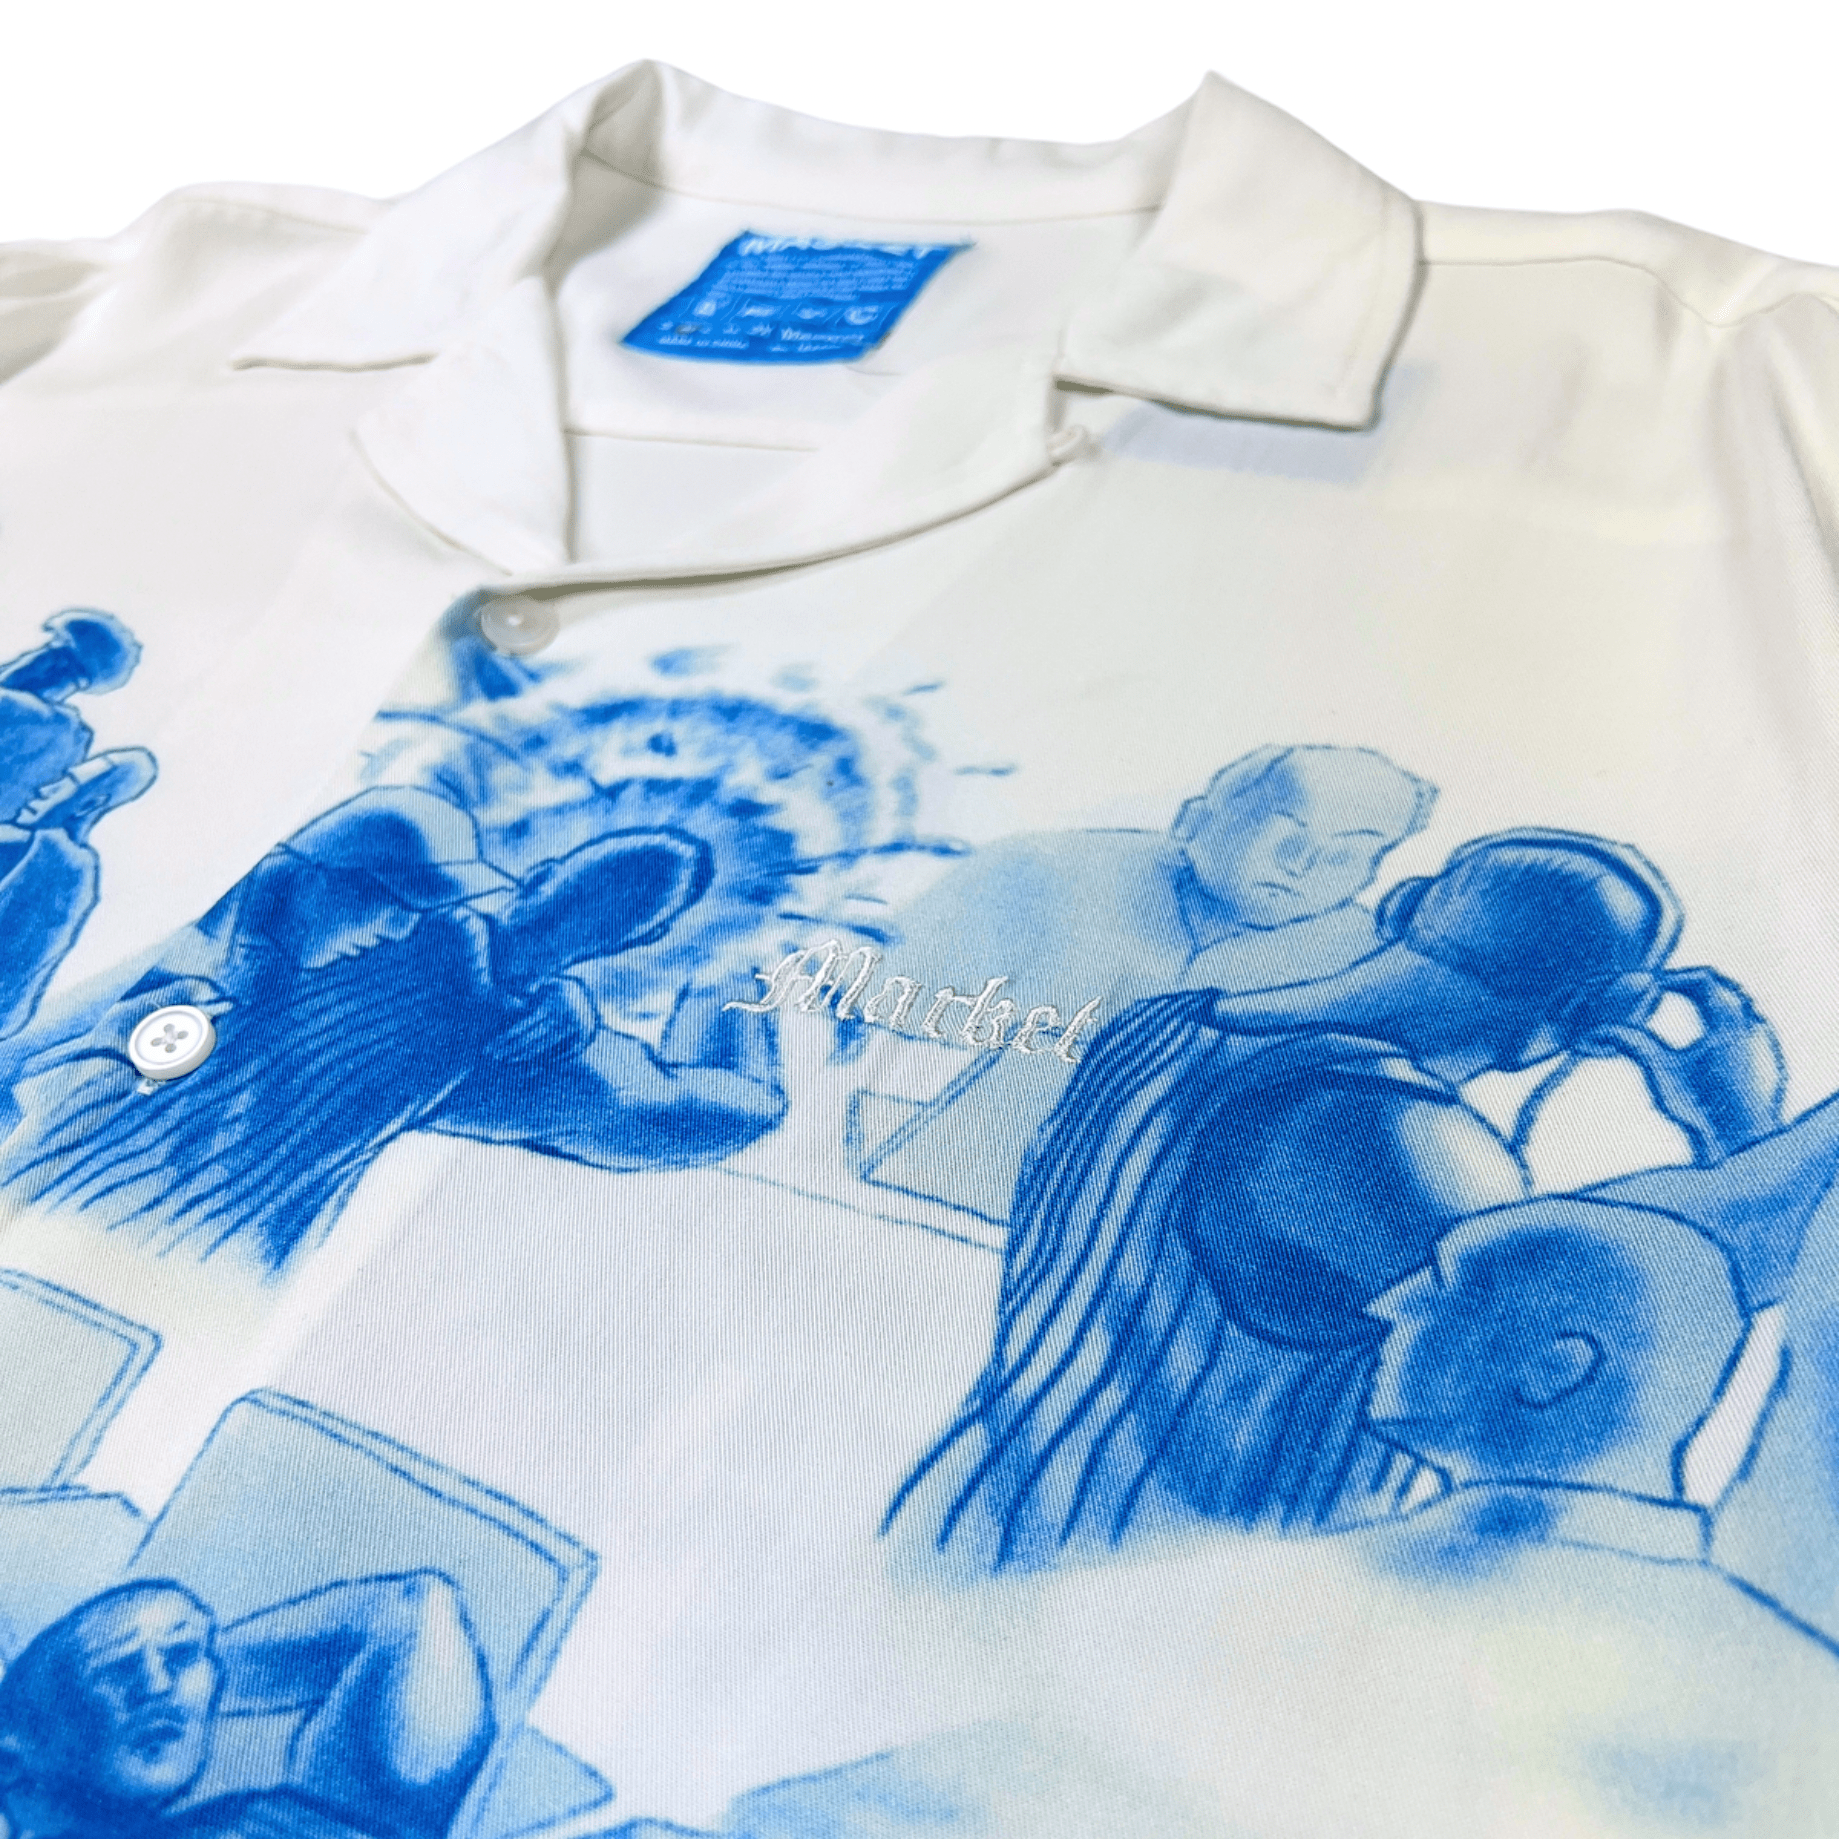 Malice Palace Camp Shirt in white and blue - MARKET - State Of Flux